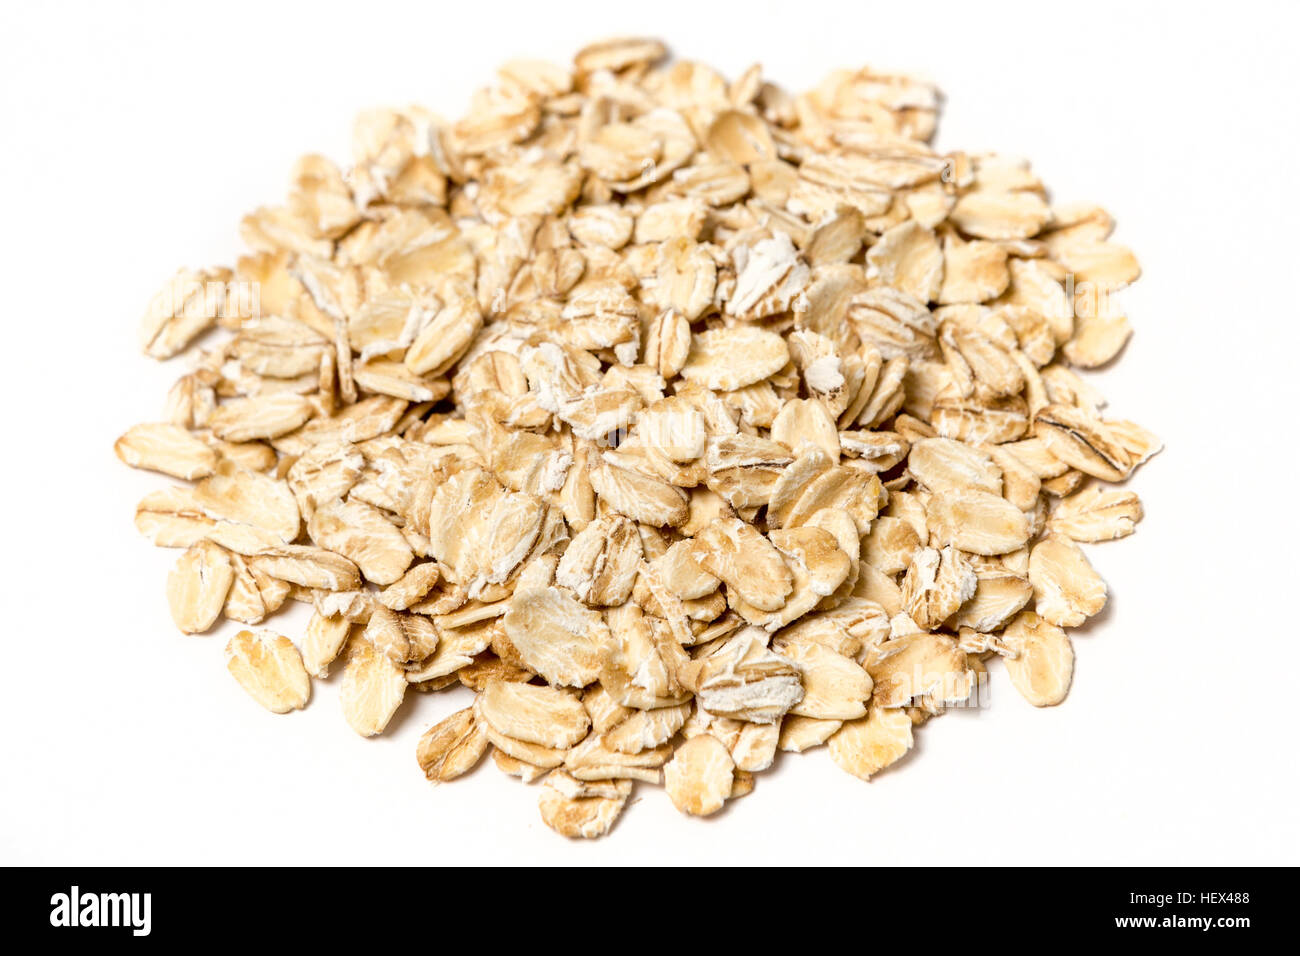 Pile of rolled oats isolated on white background Stock Photo